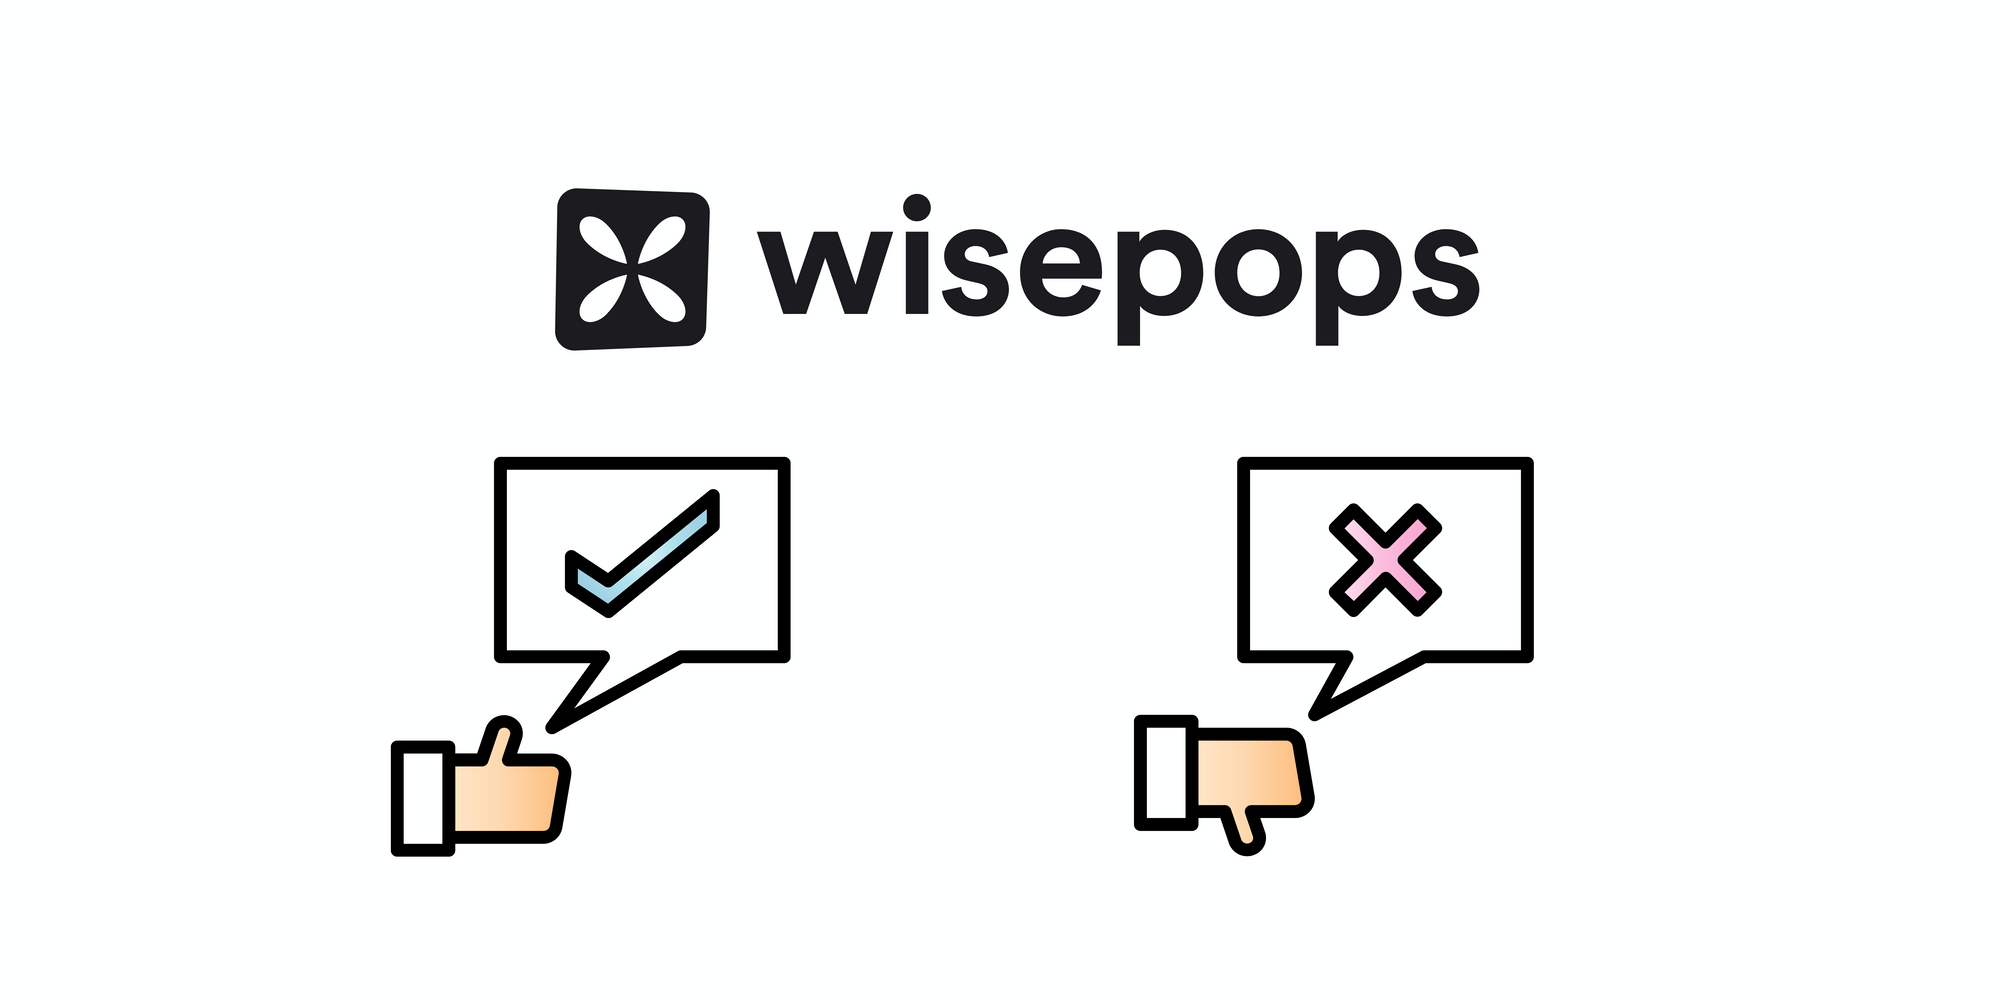 Wisepops icon, check and x icons with thumbs-up & thumbs-down on white background to talk about the pros and cons